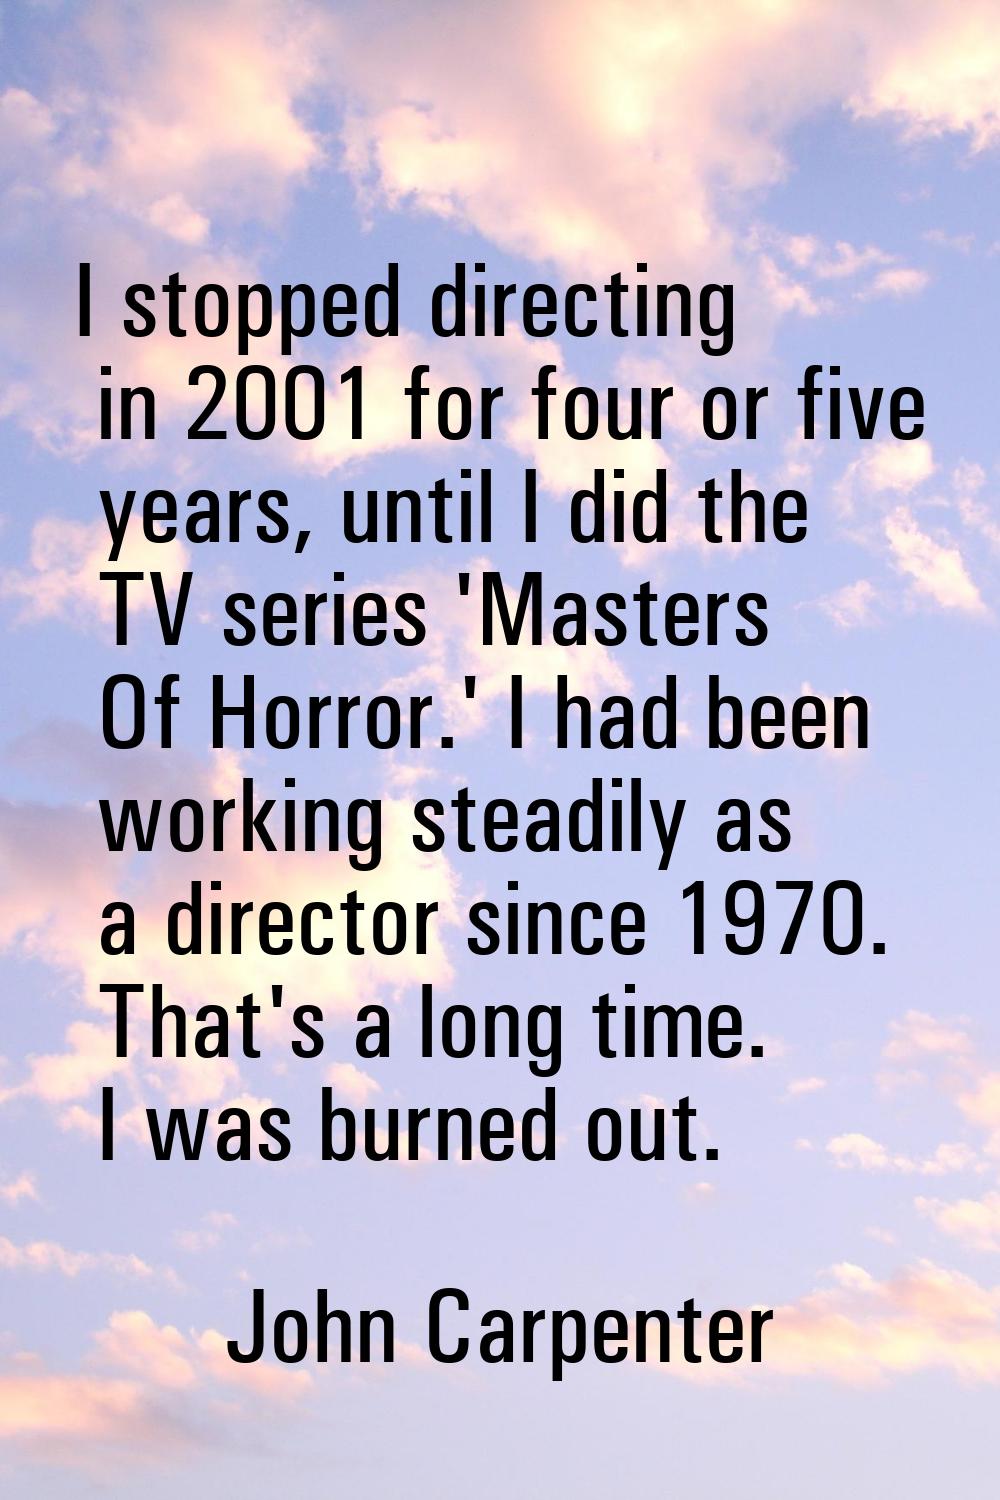 I stopped directing in 2001 for four or five years, until I did the TV series 'Masters Of Horror.' 